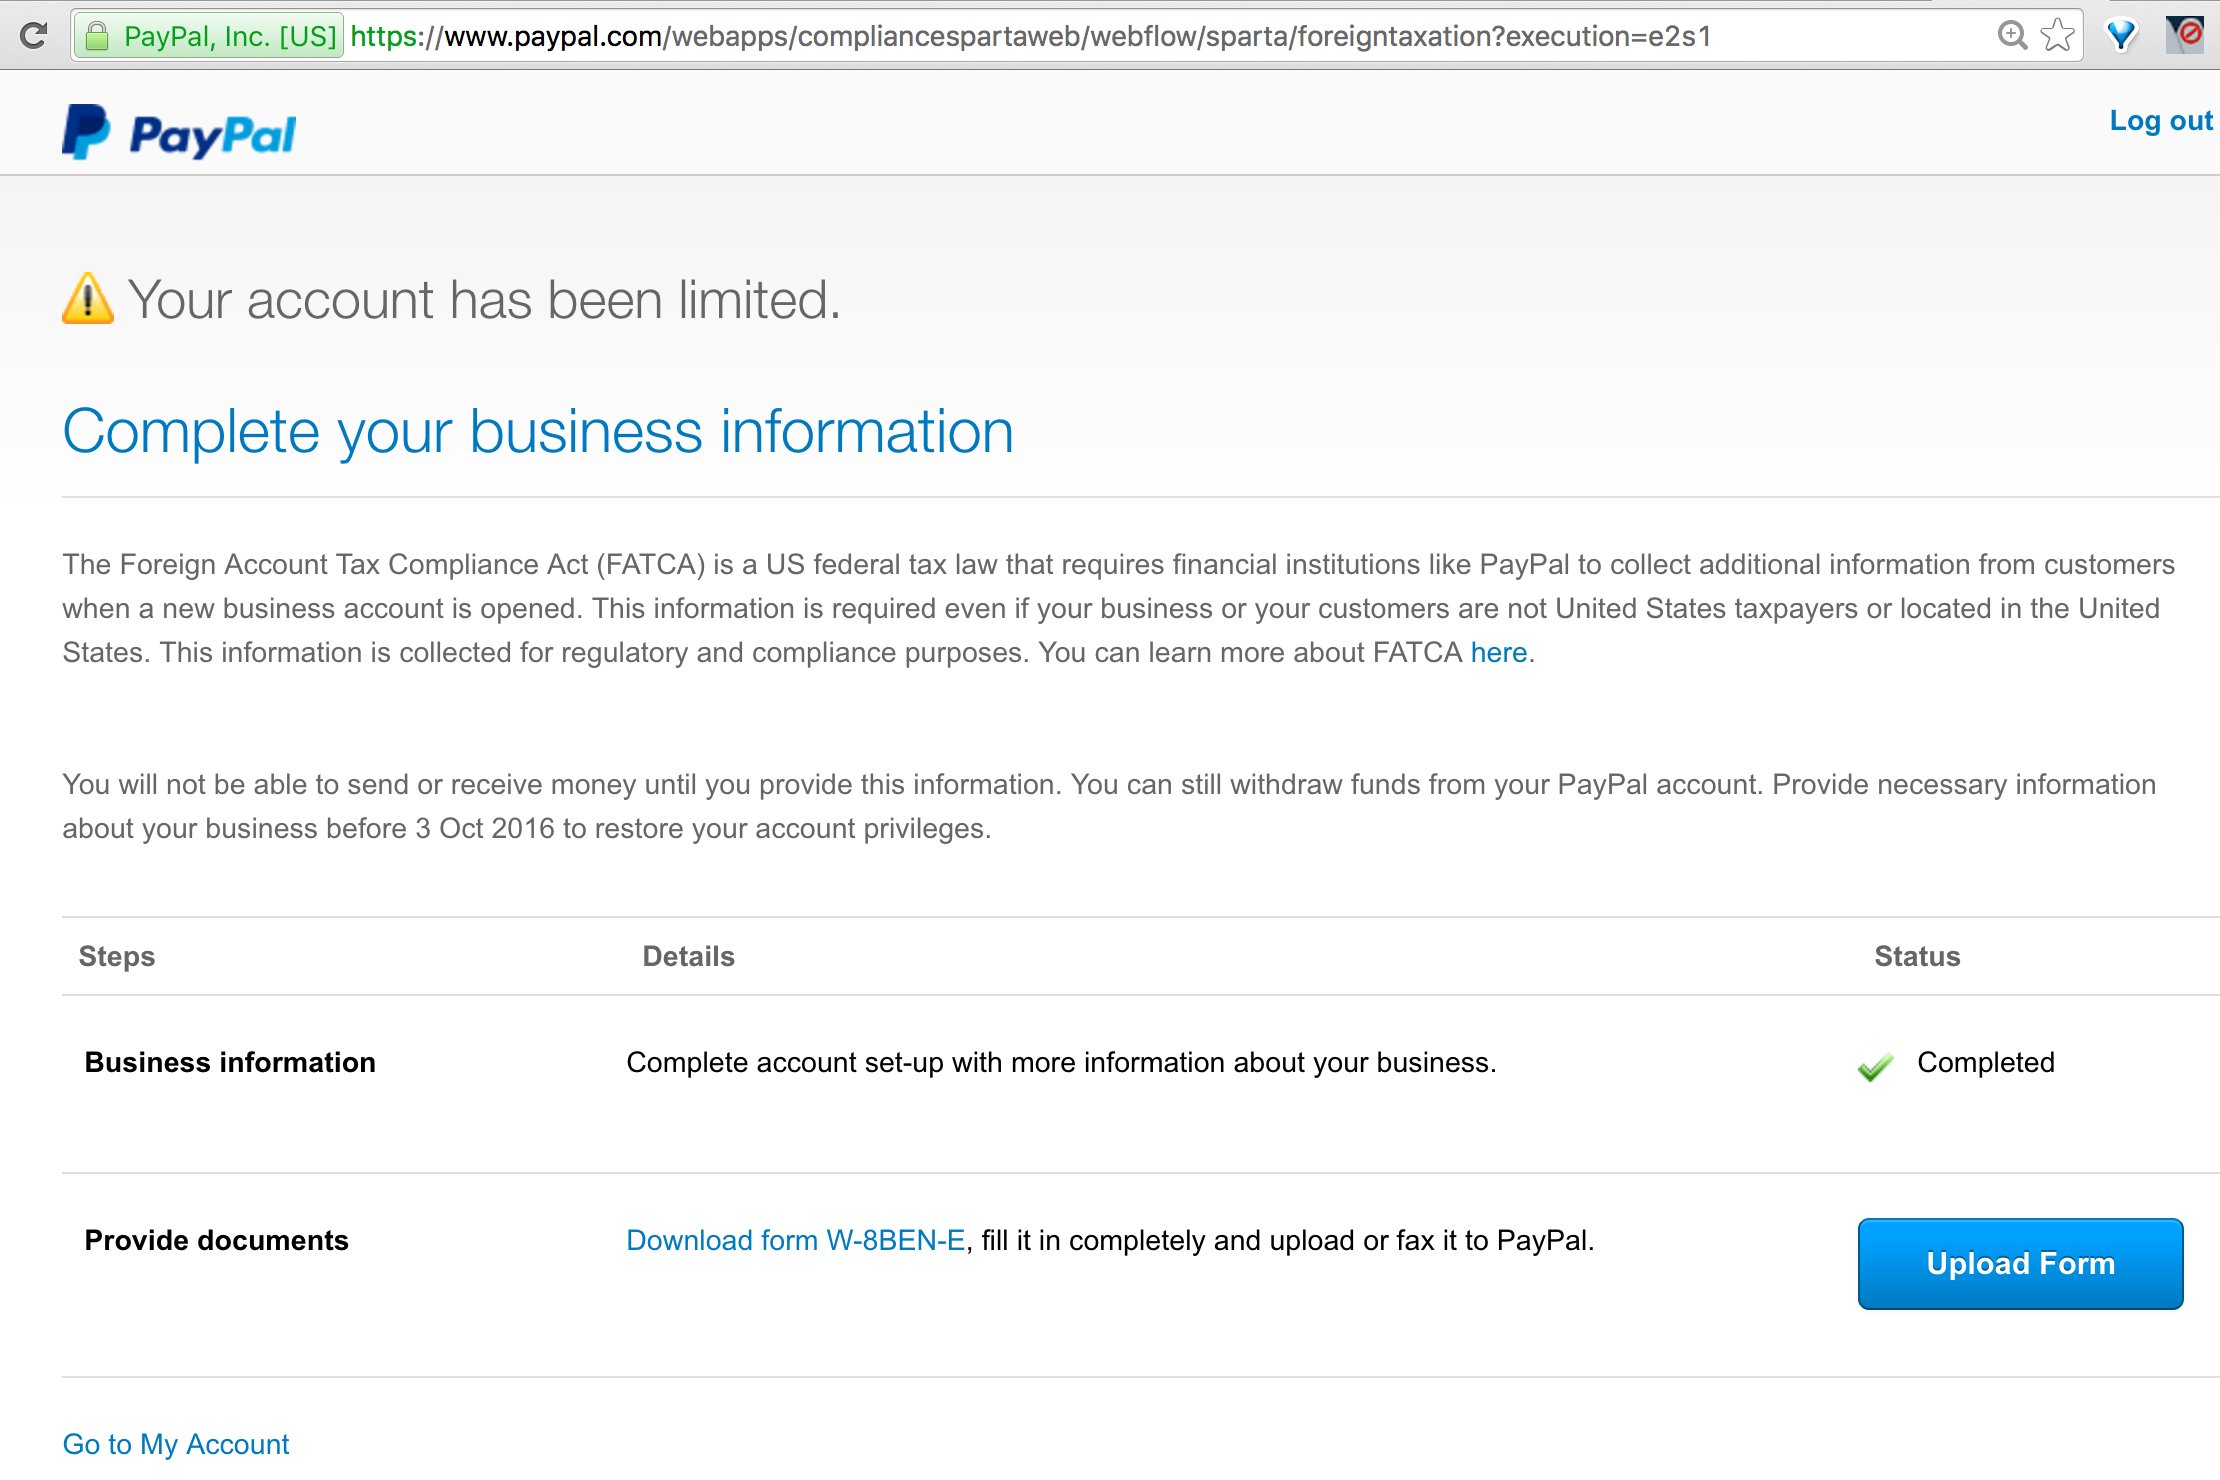 PayPal - Your account has been limited - Complete your business information